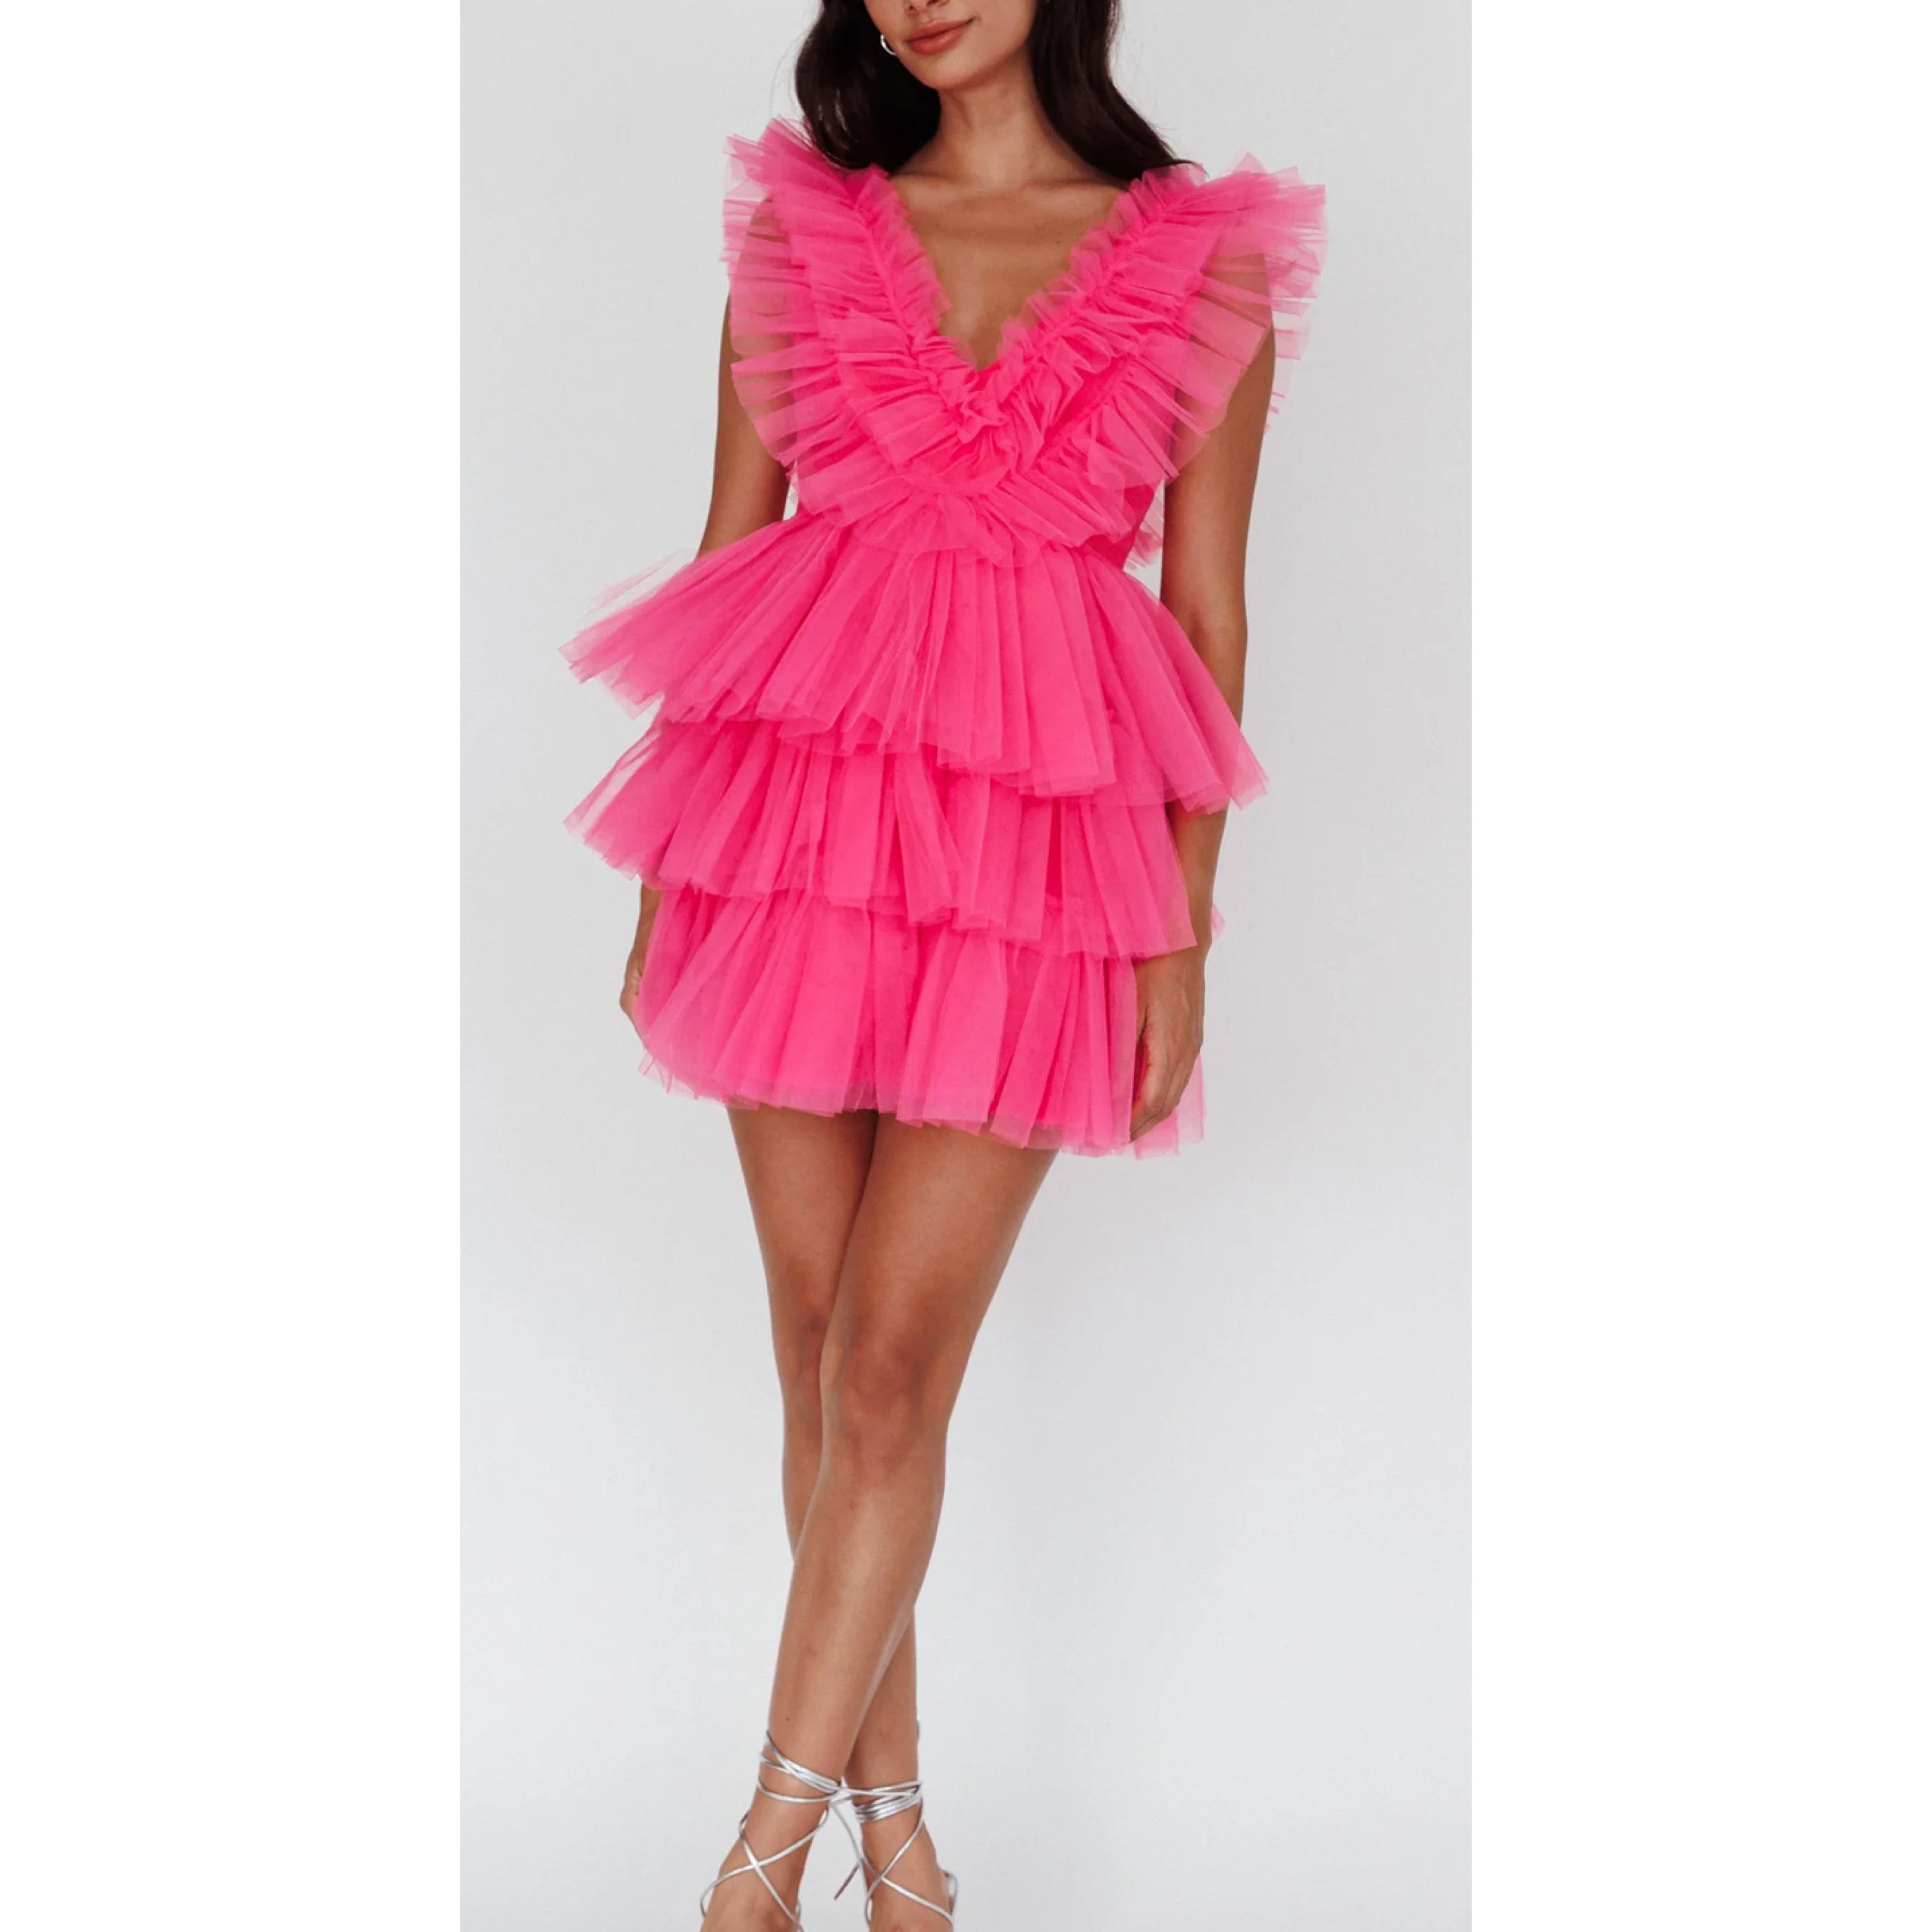 Mable hot pink dress, size L